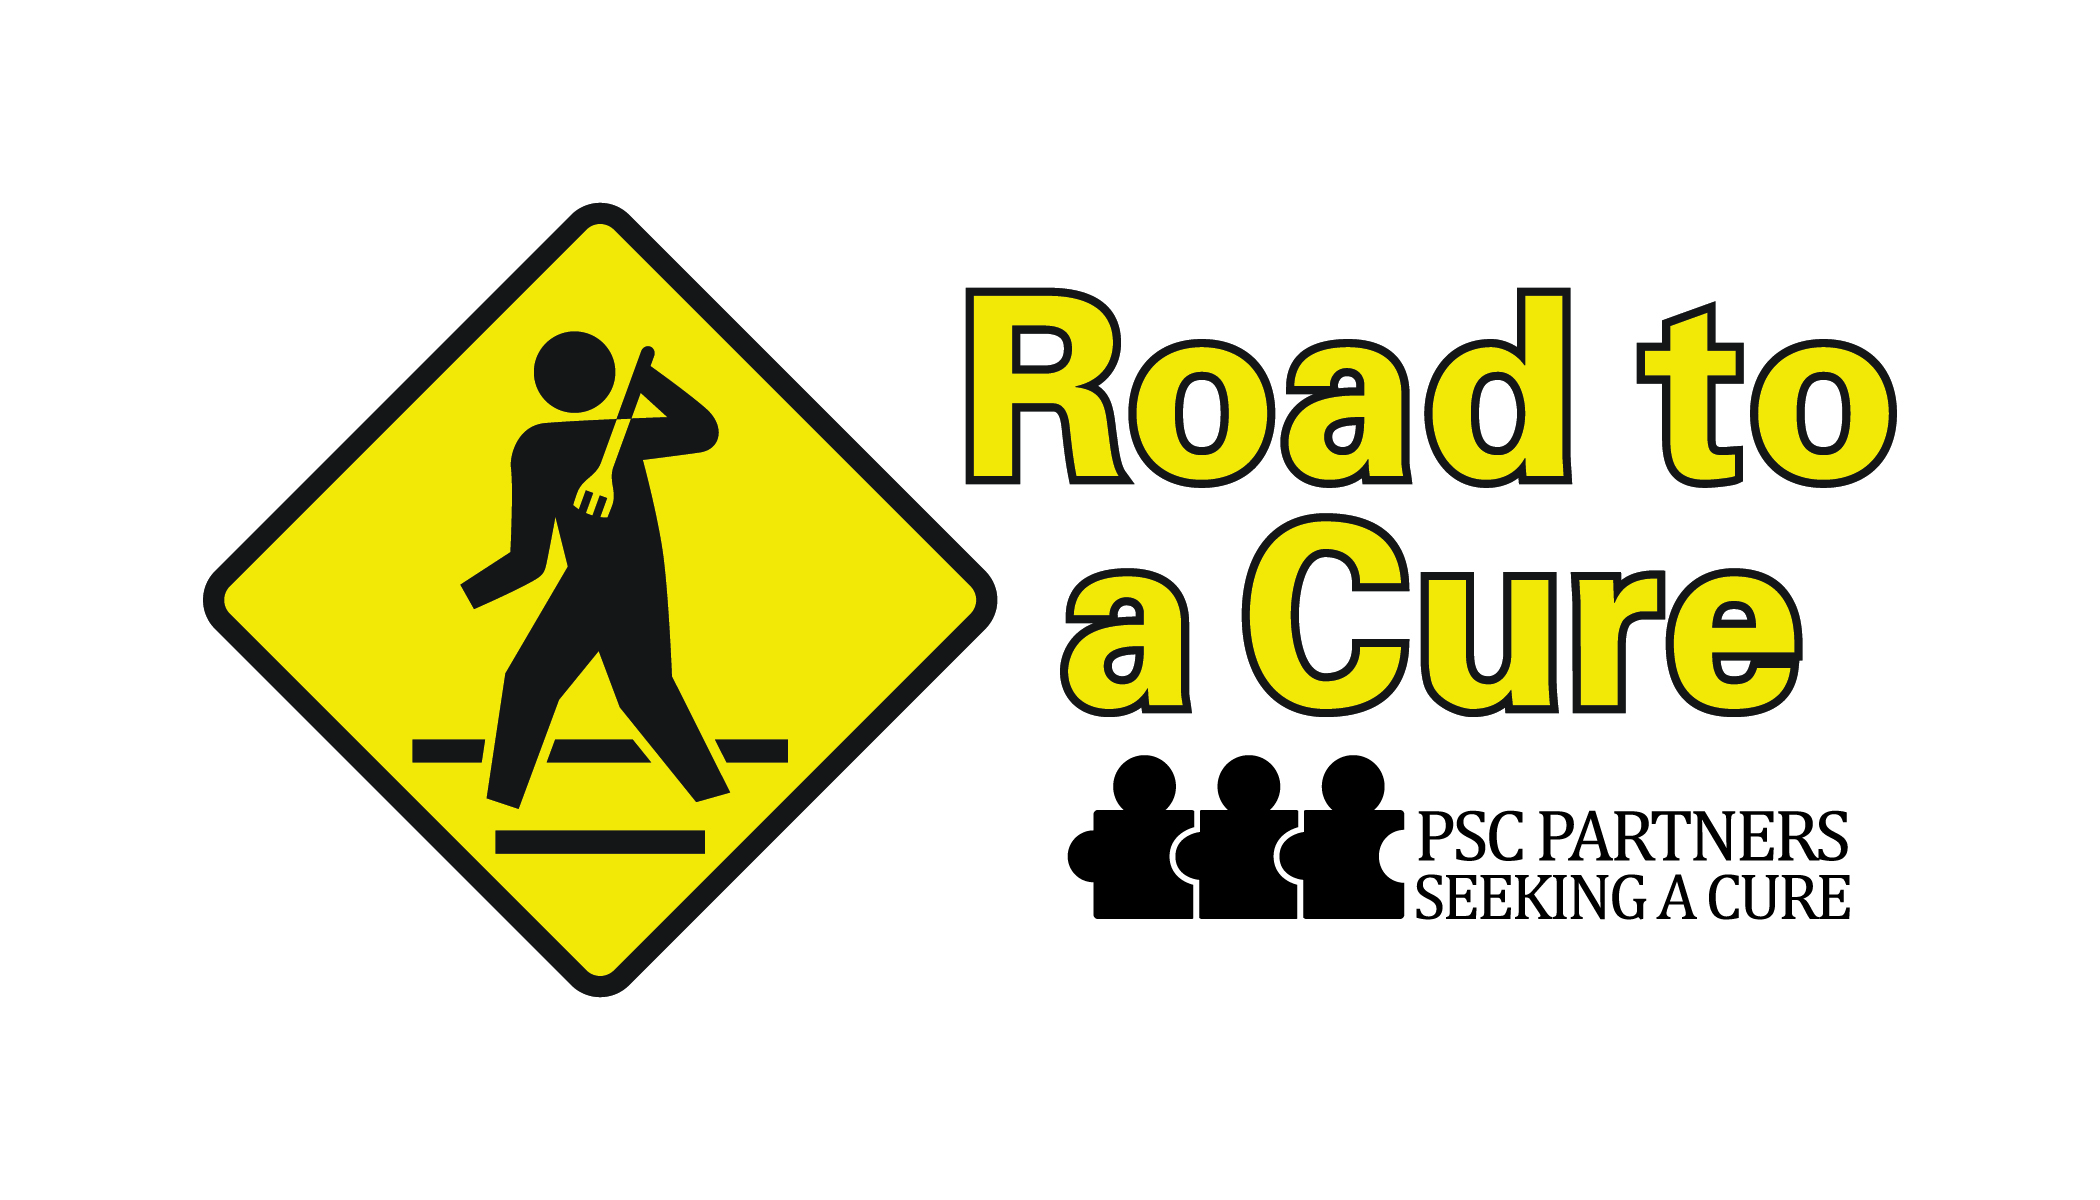 Road to a cure